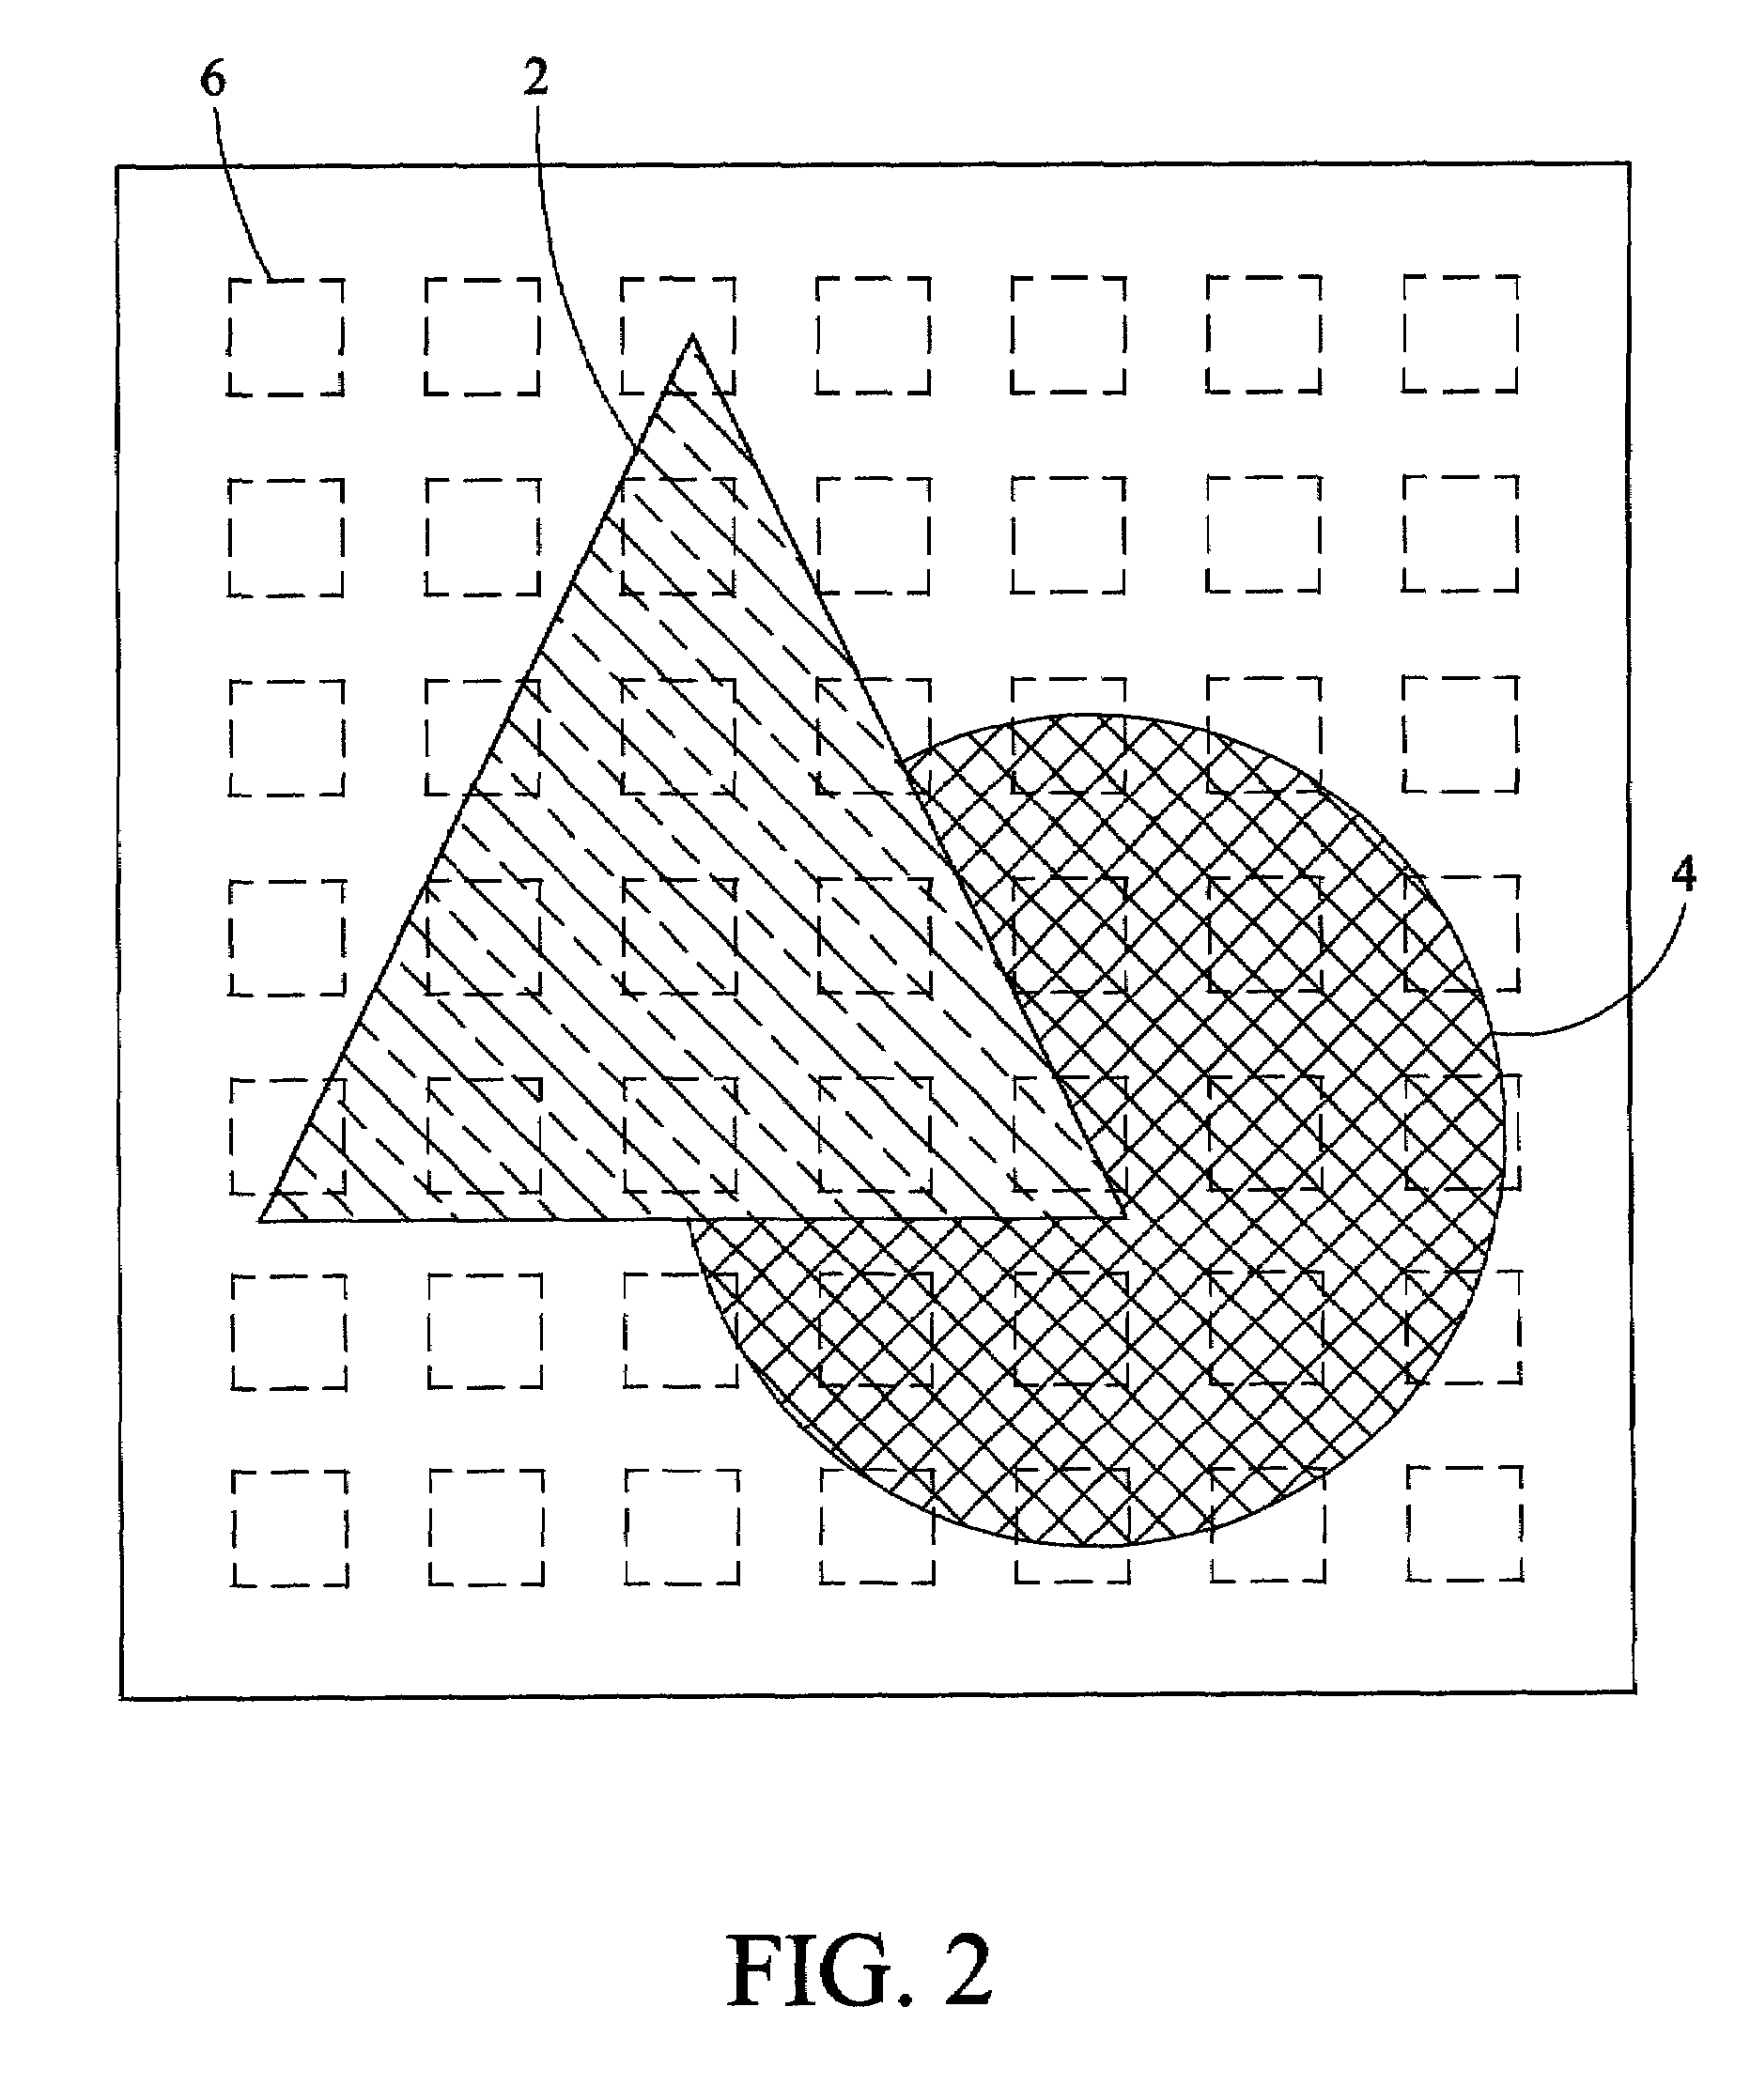 Method for image description using color and local spatial information